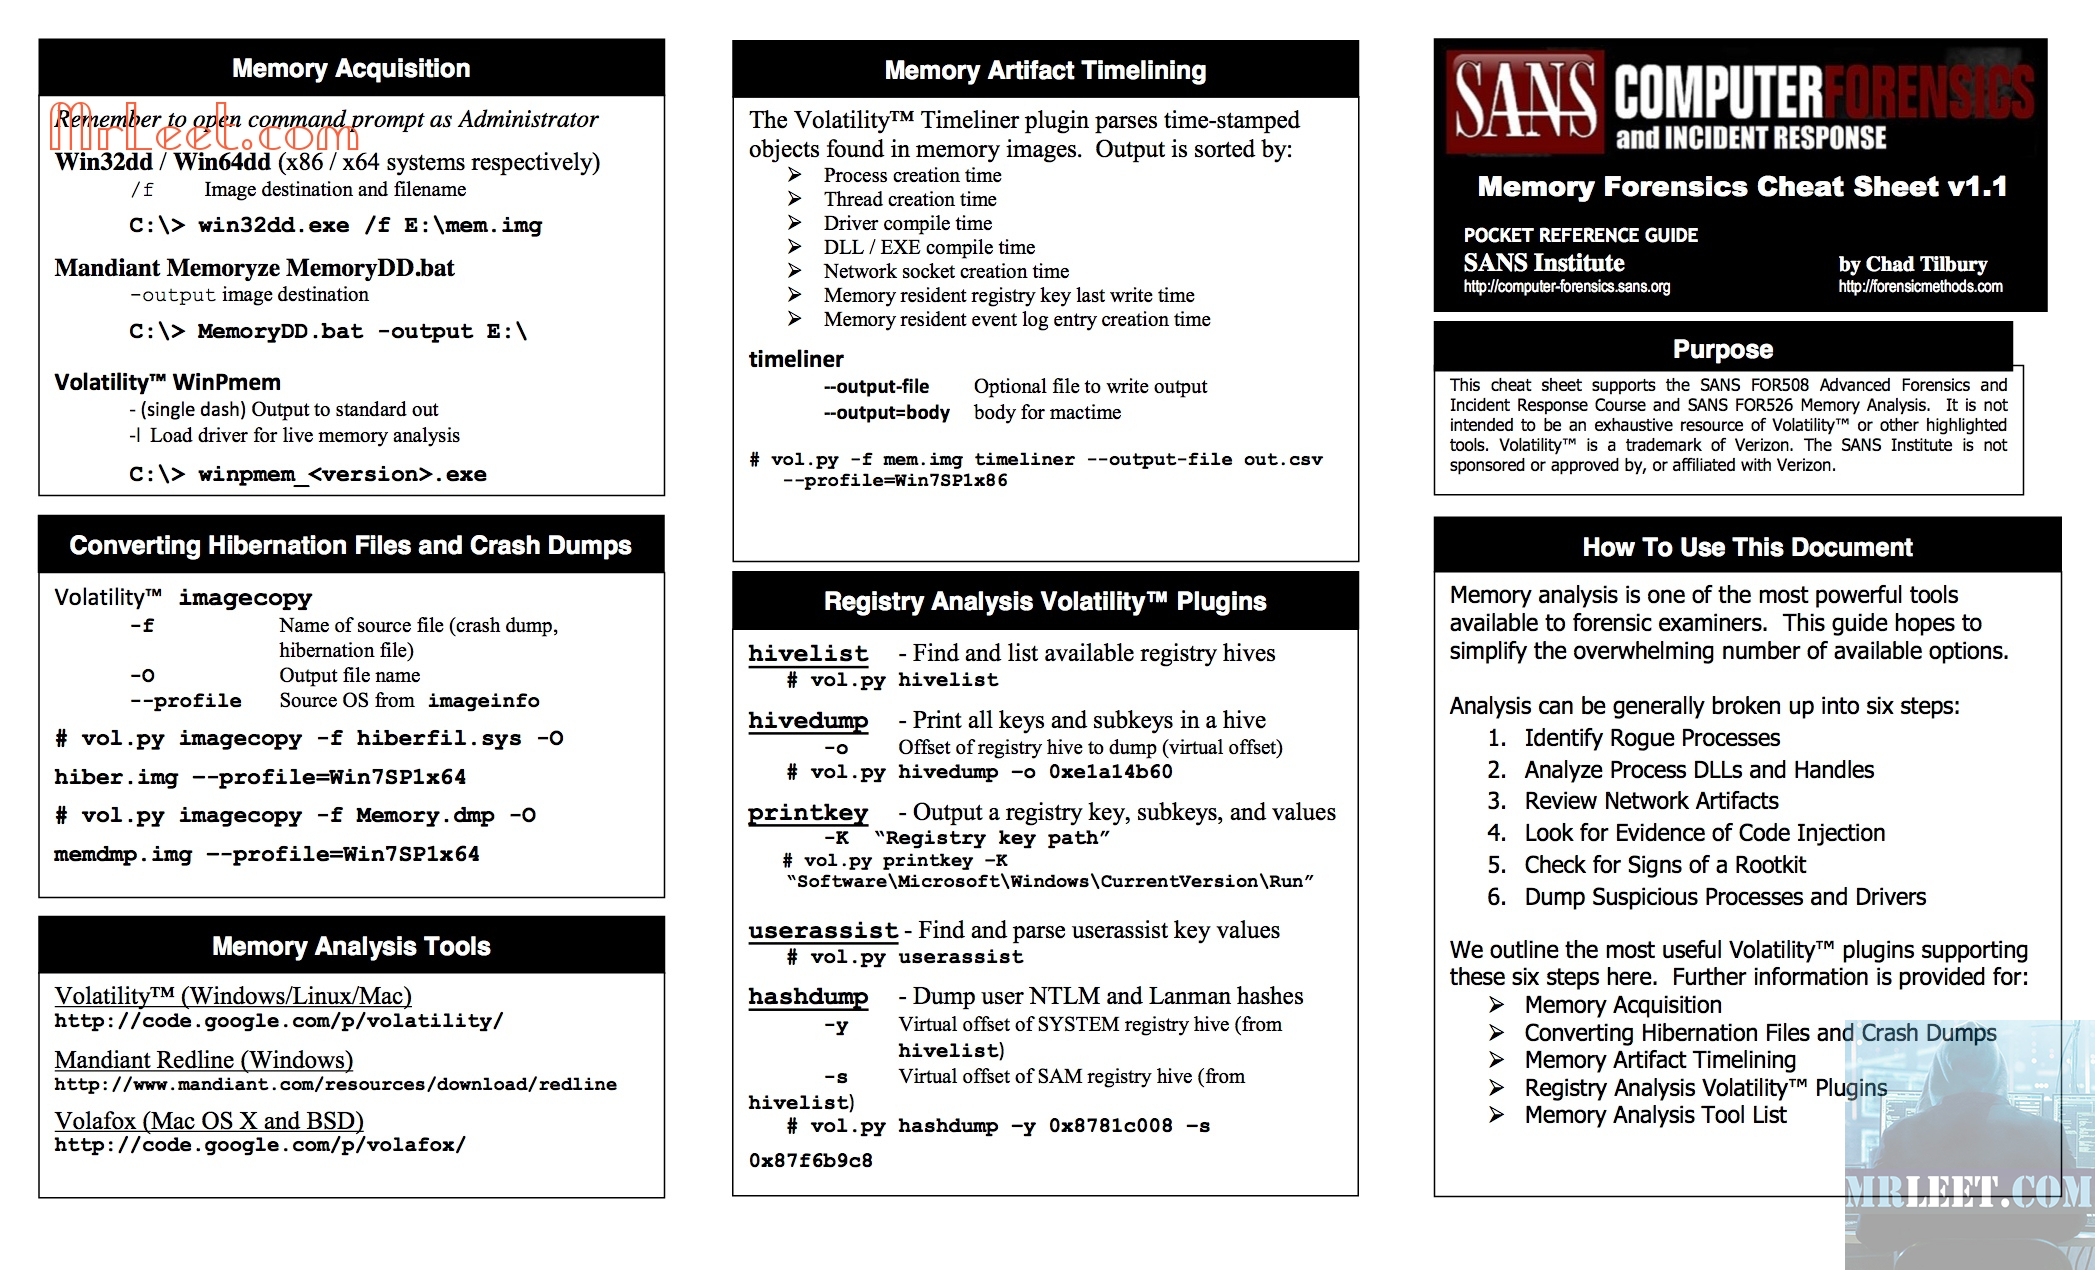 Memory Forensics Cheat Sheet by SANS Digital Forensics and Incident Response